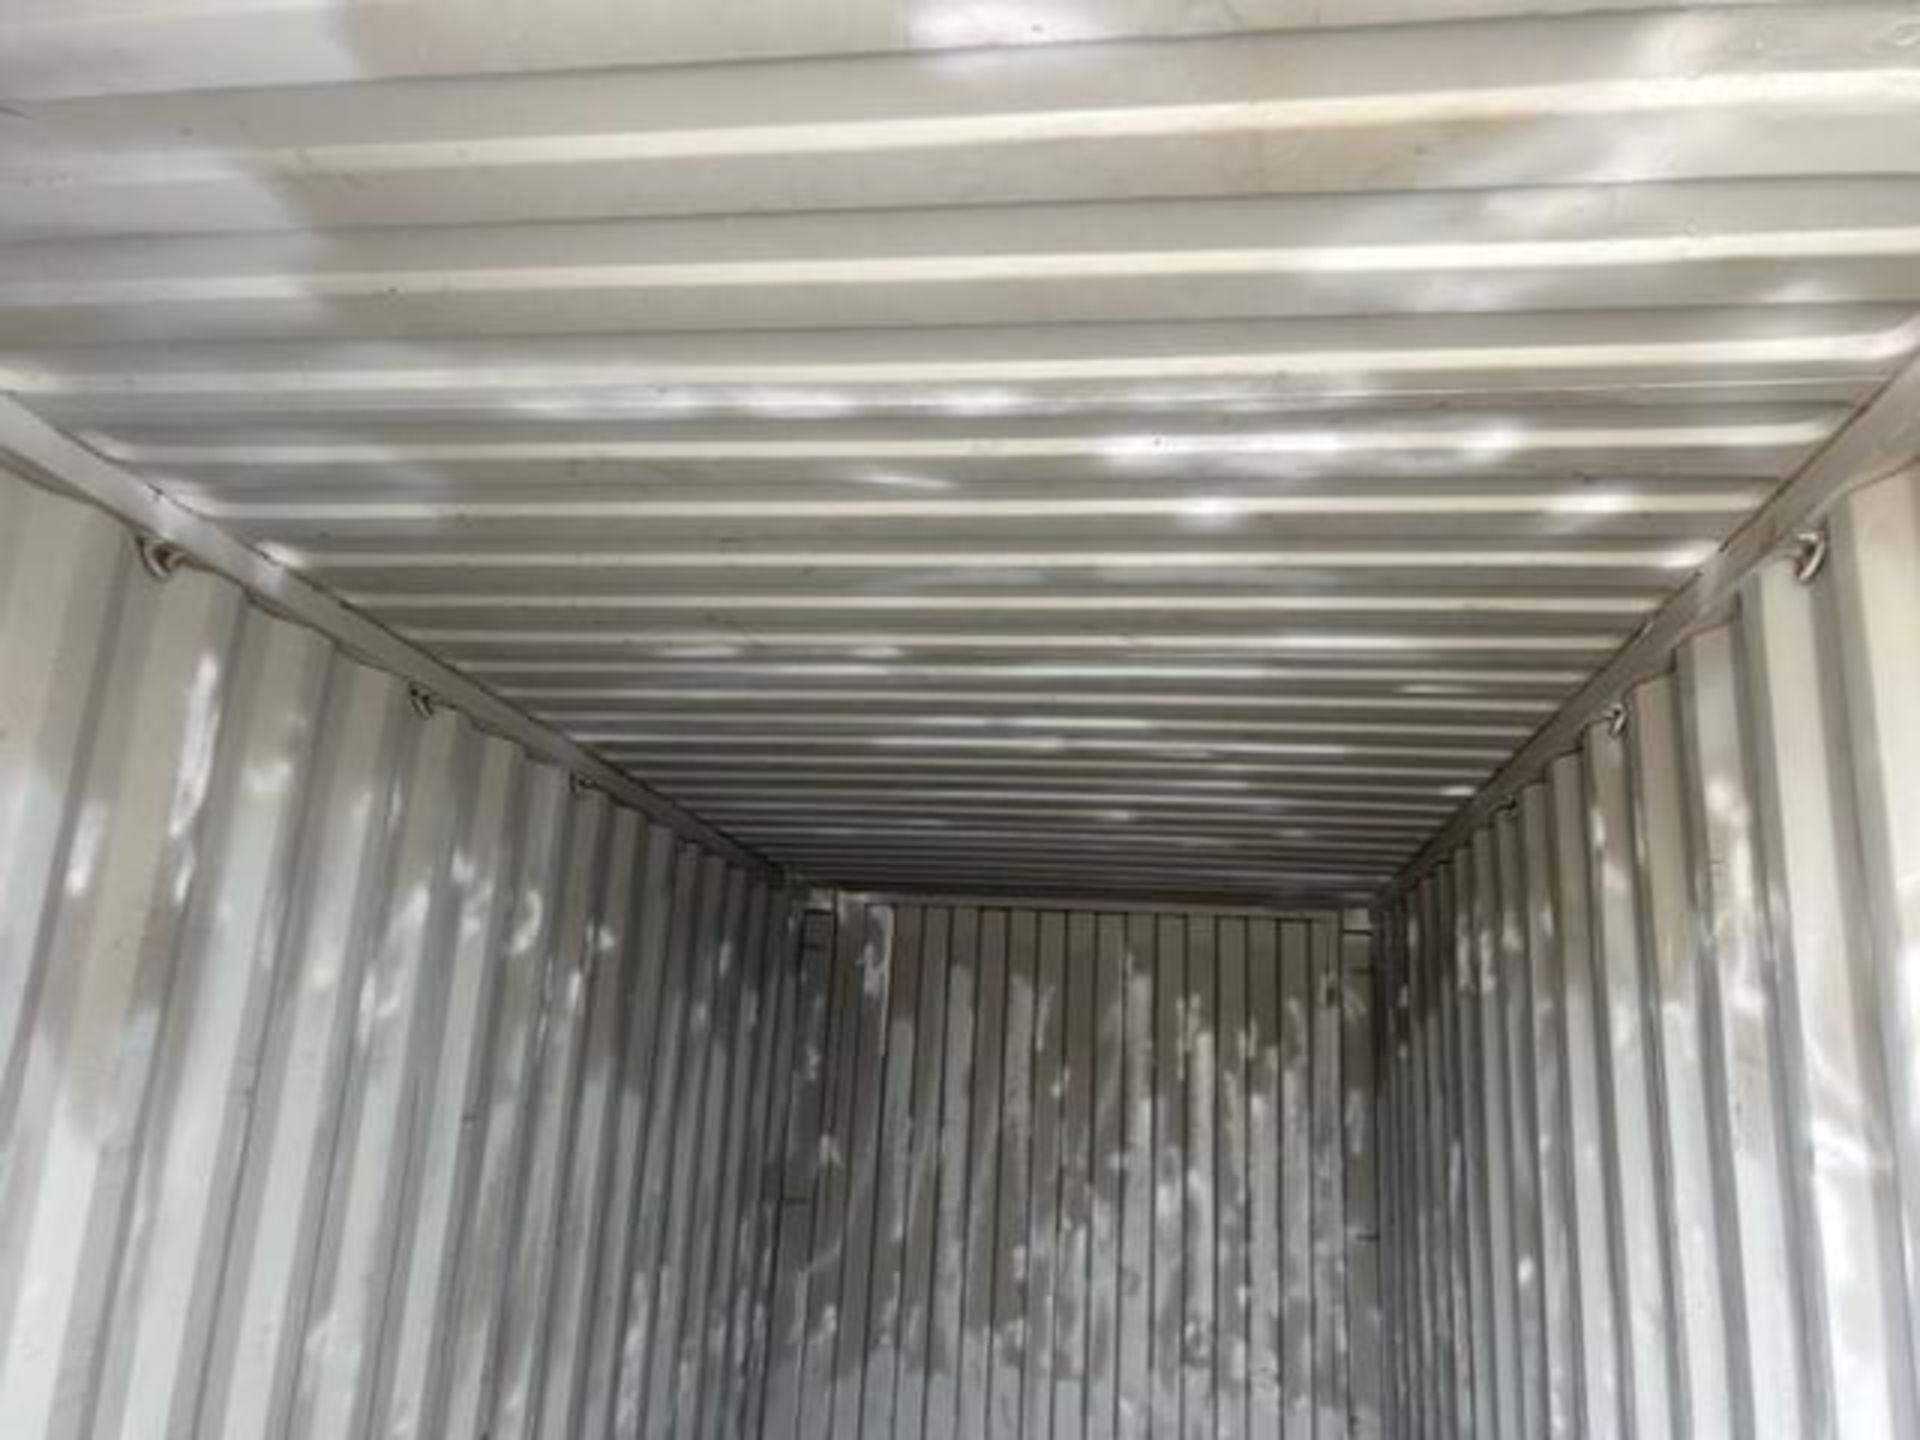 20' Sea Container SN#: CAIU2176670 (Located in S.E. Calgary) - Image 7 of 11